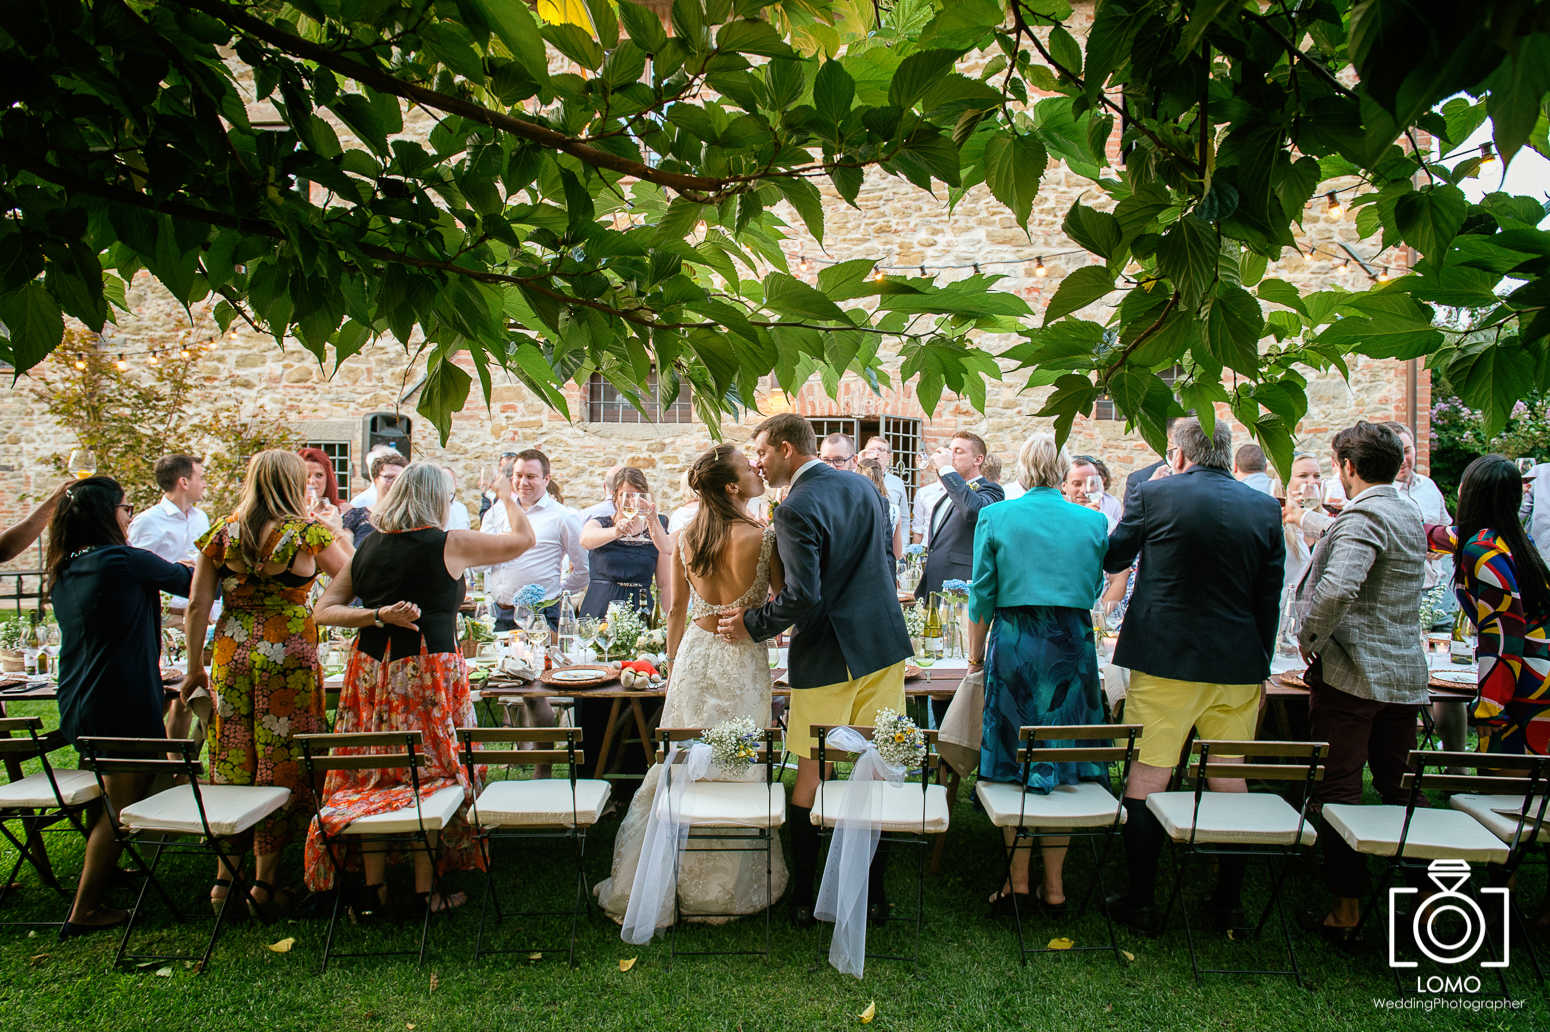 Susie & Rich - Country chic wedding in Umbria